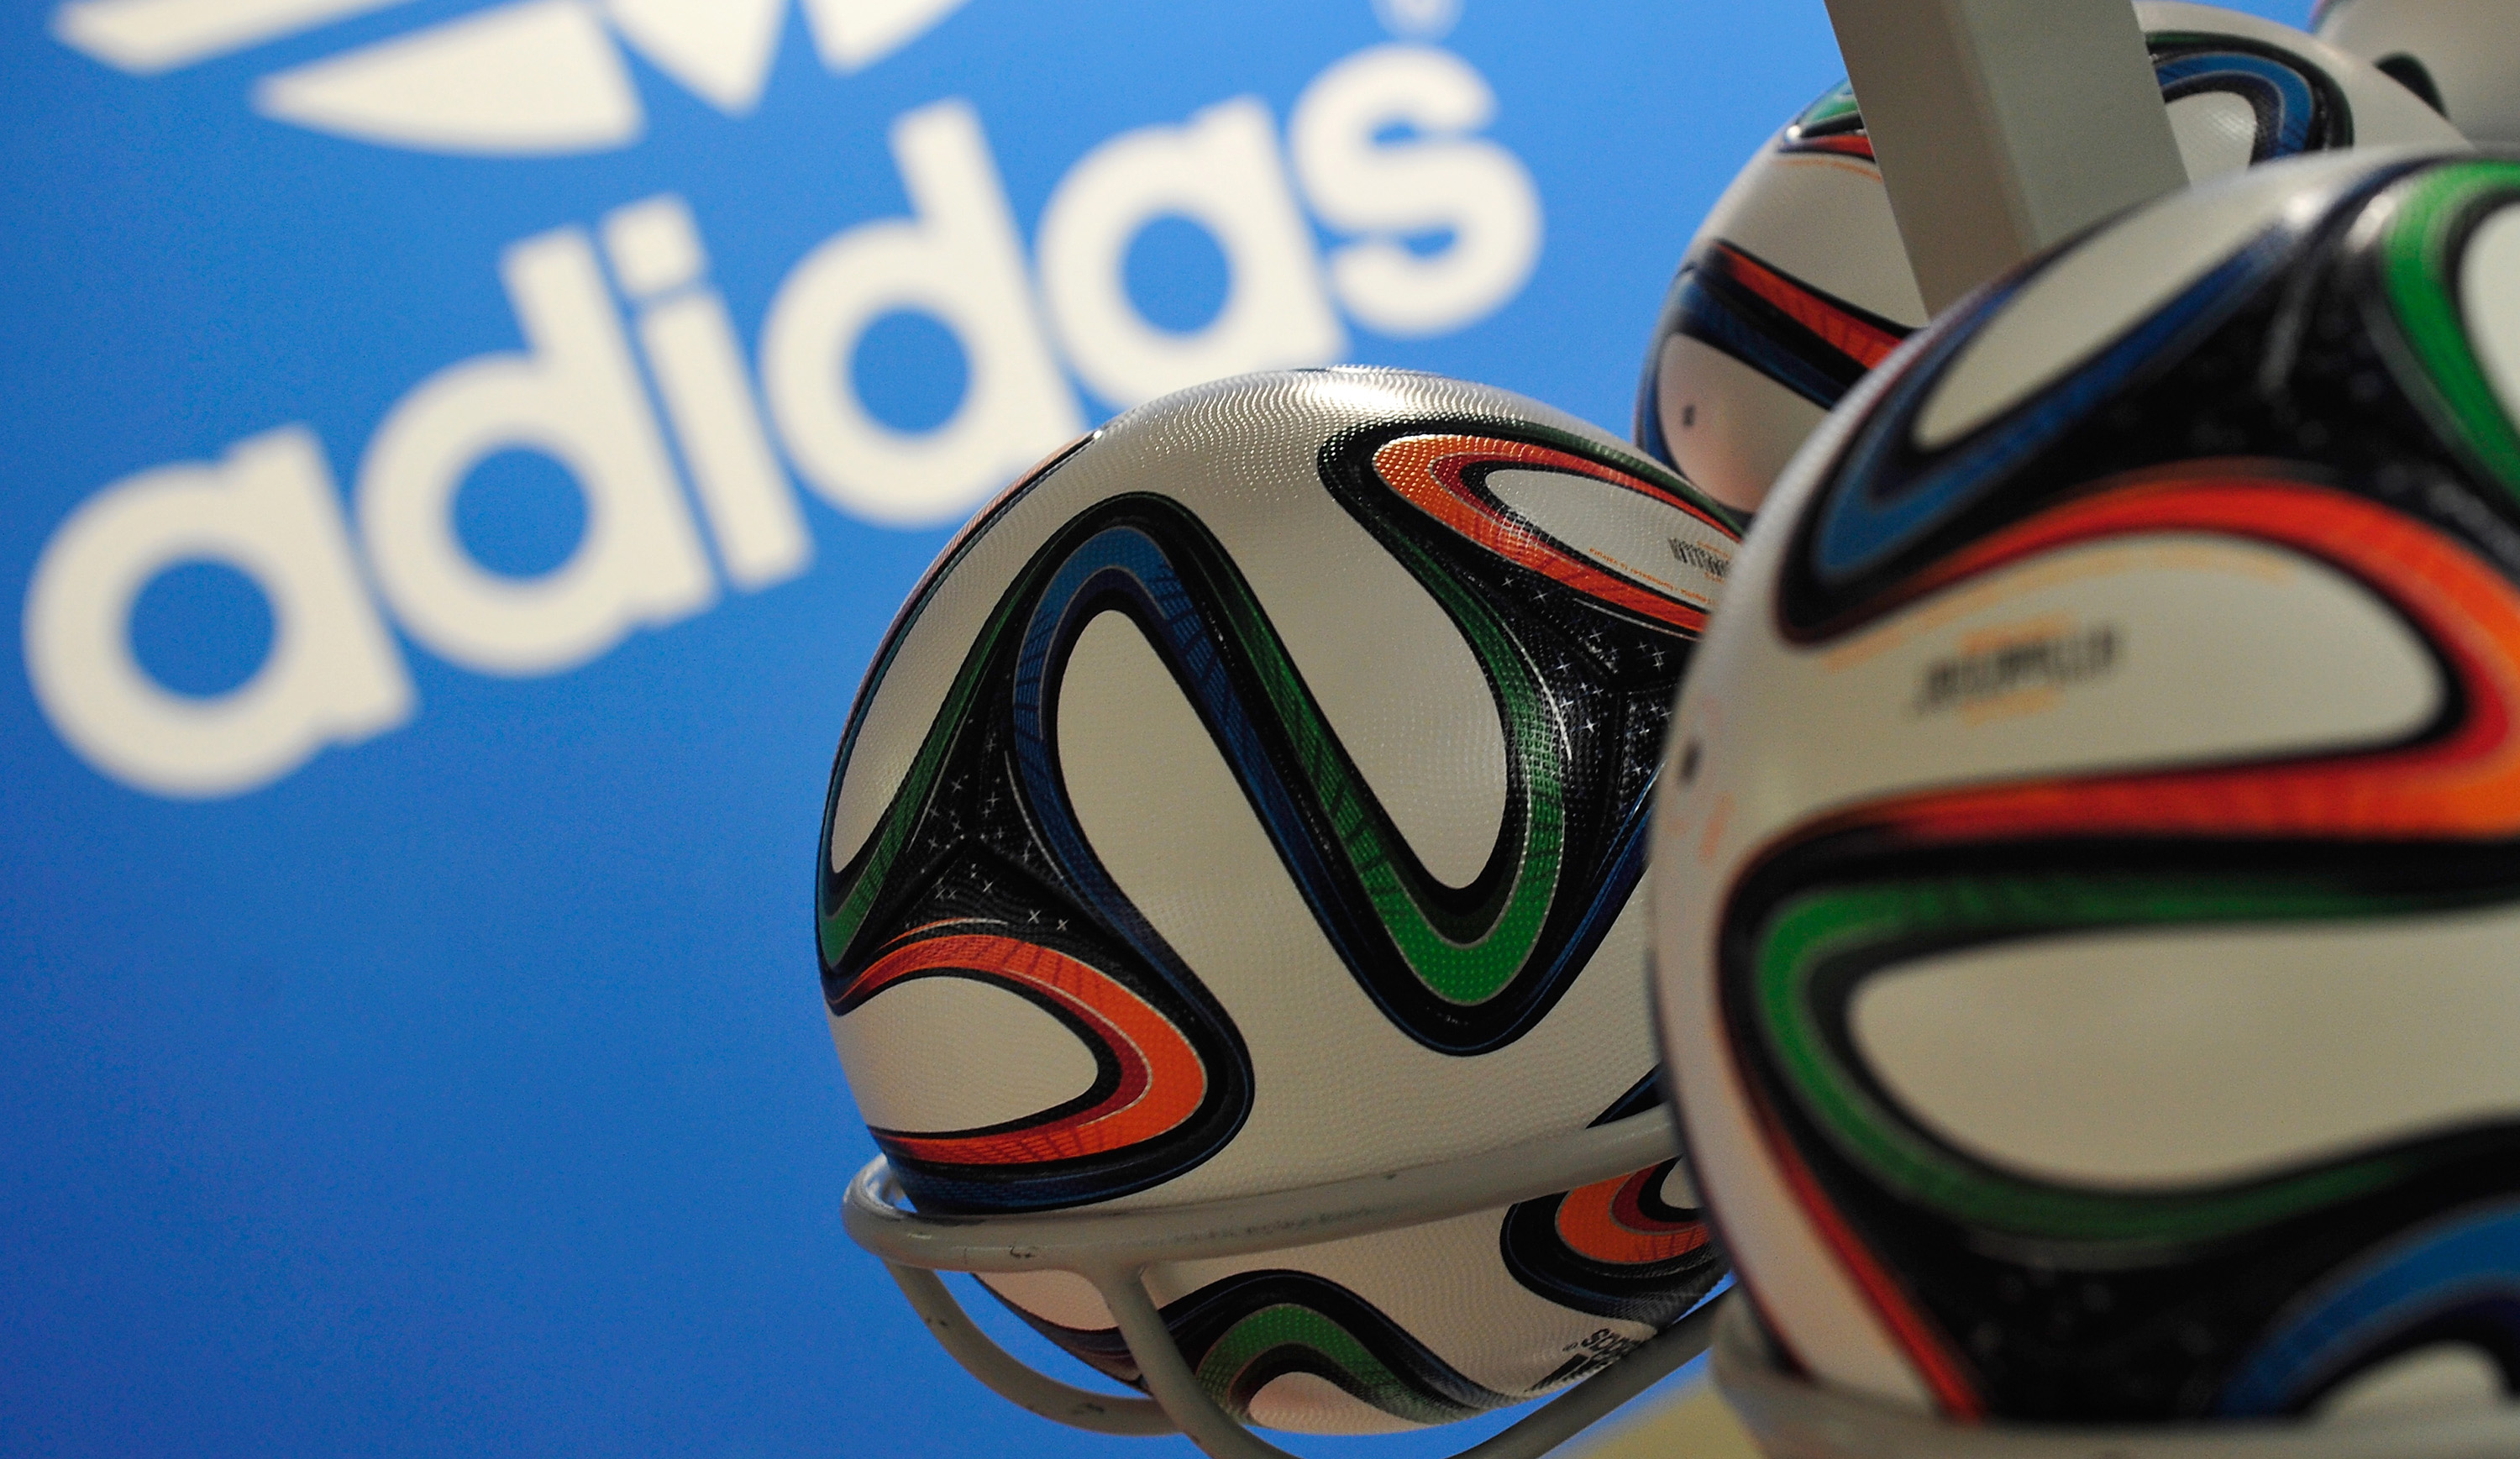 Adidas withdraws 'sexualised' World Cup T-shirts after Brazil